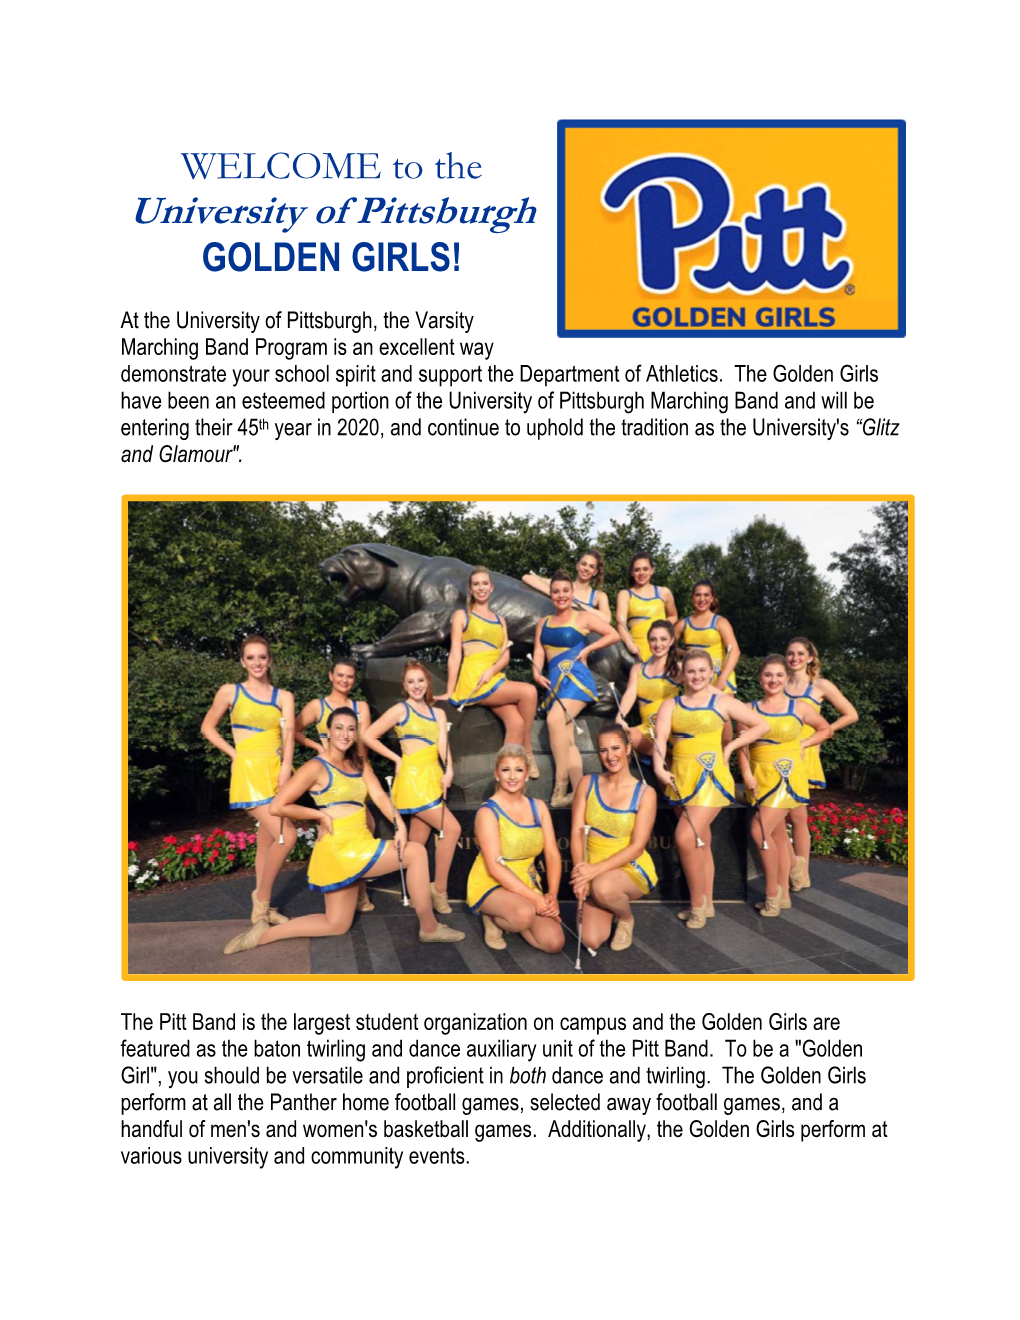 WELCOME to the University of Pittsburgh GOLDEN GIRLS!